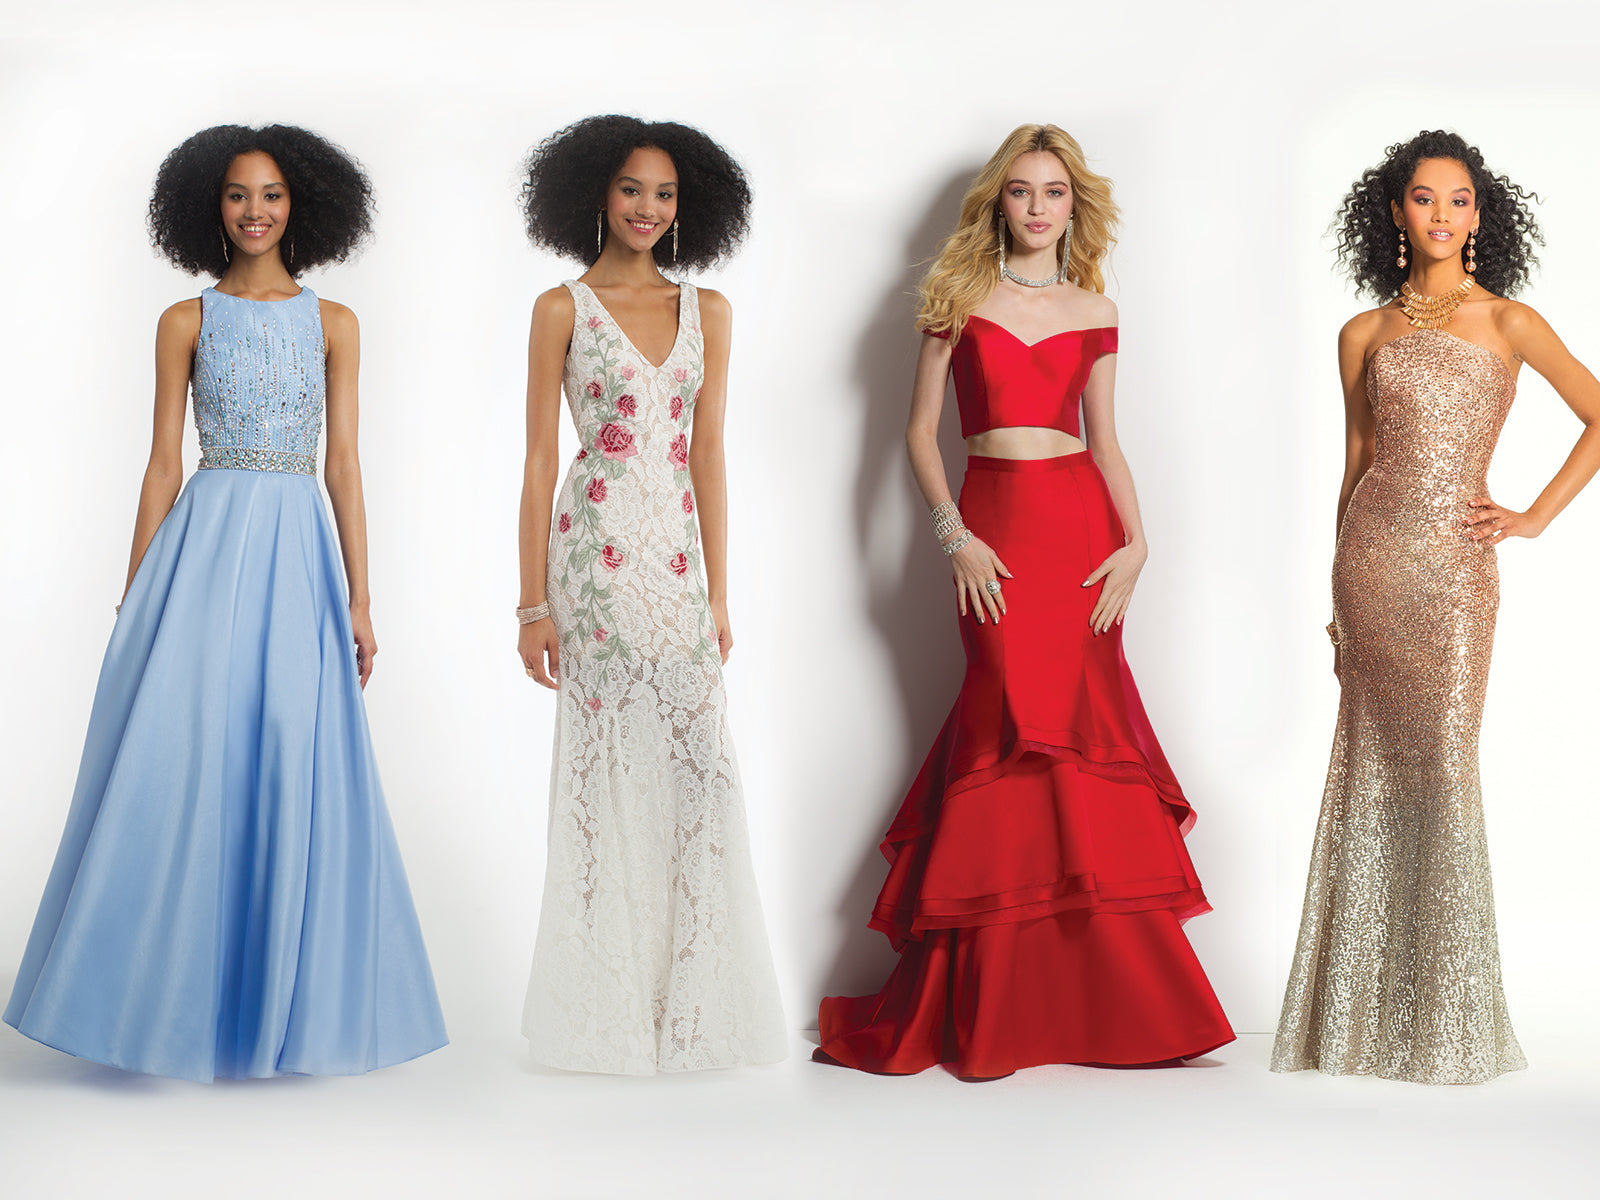 Find Your Perfect Prom Dress Style with Camille La Vie